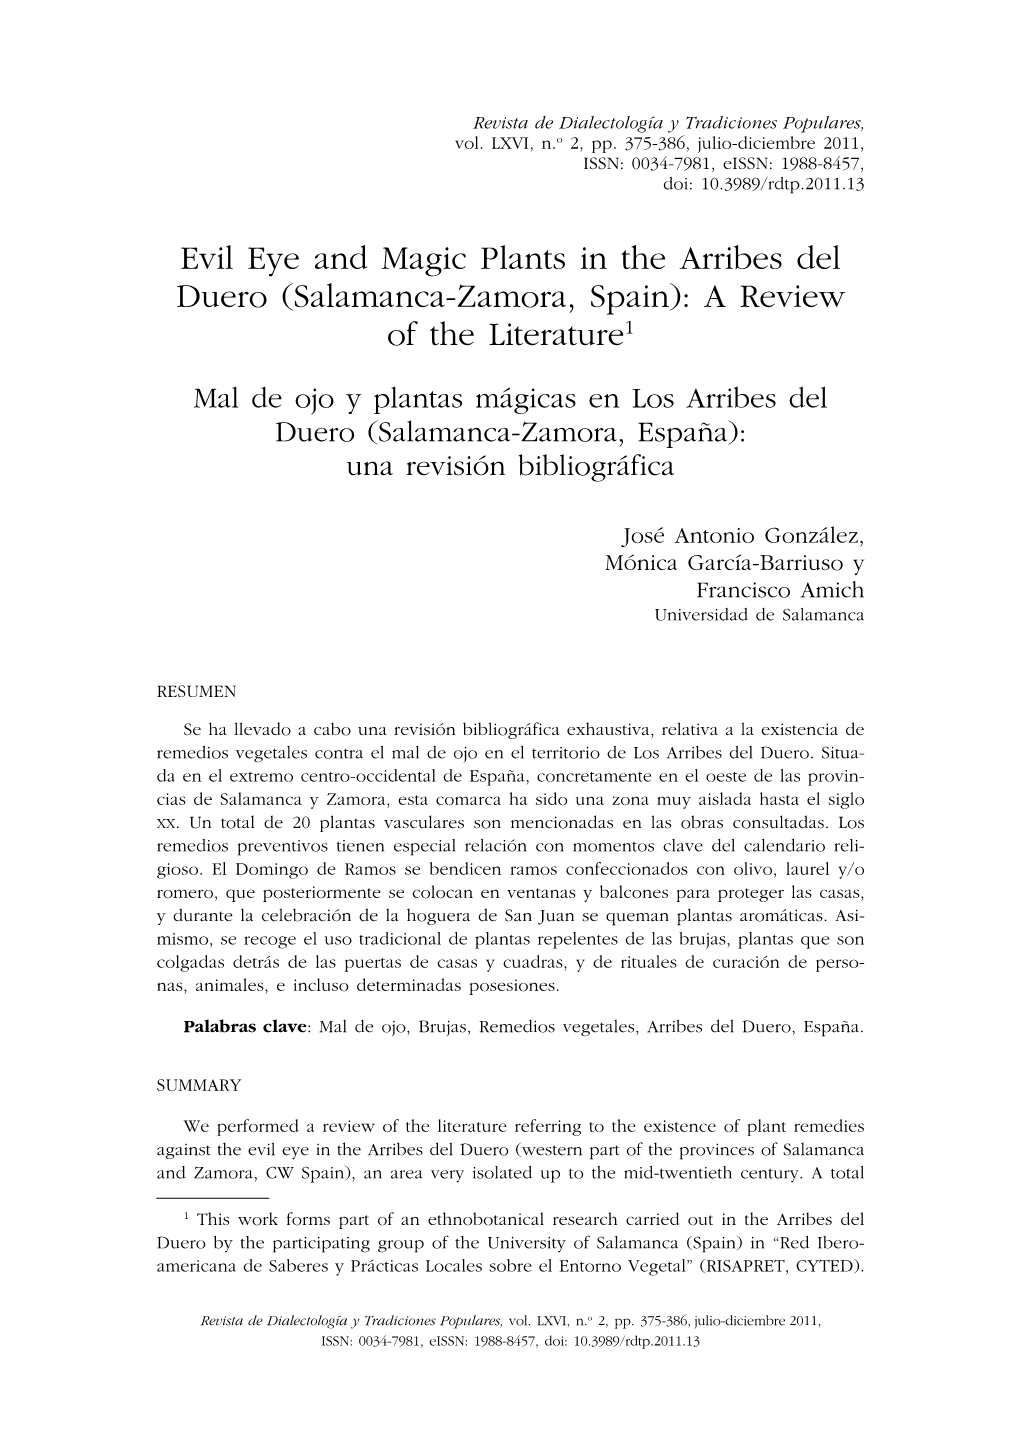 Evil Eye and Magic Plants in the Arribes Del Duero (Salamanca-Zamora, Spain): a Review of the Literature1